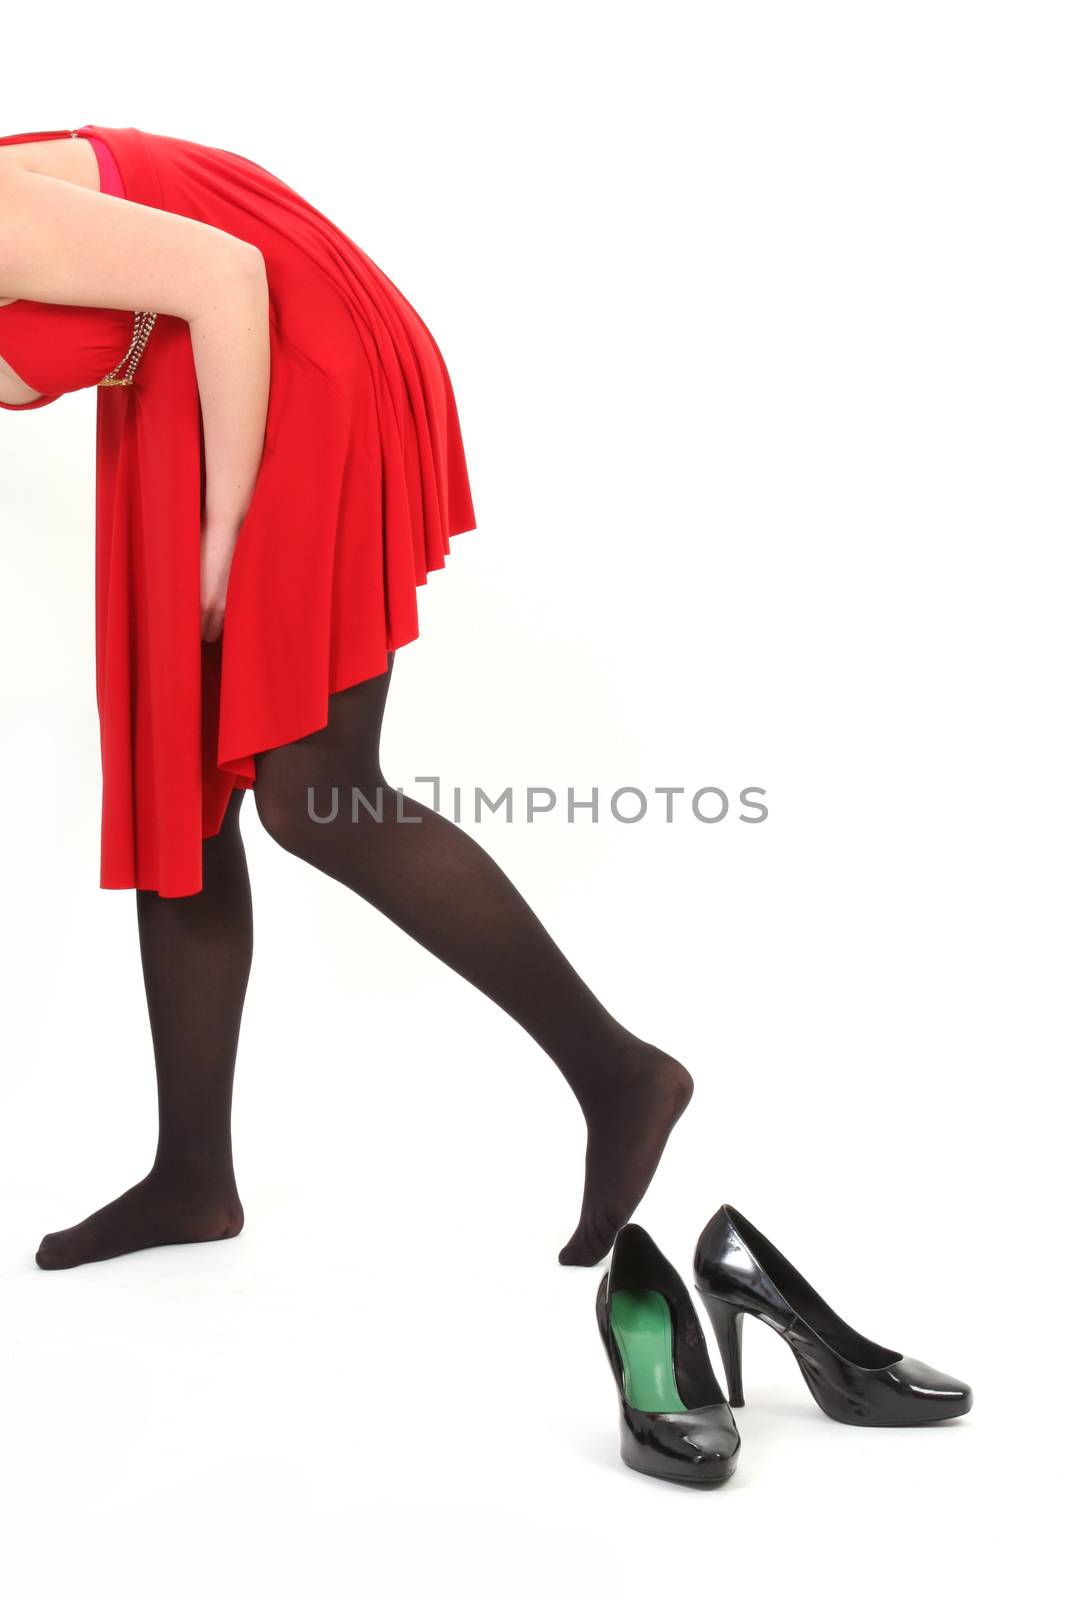 woman with red dress and back shoes on white background